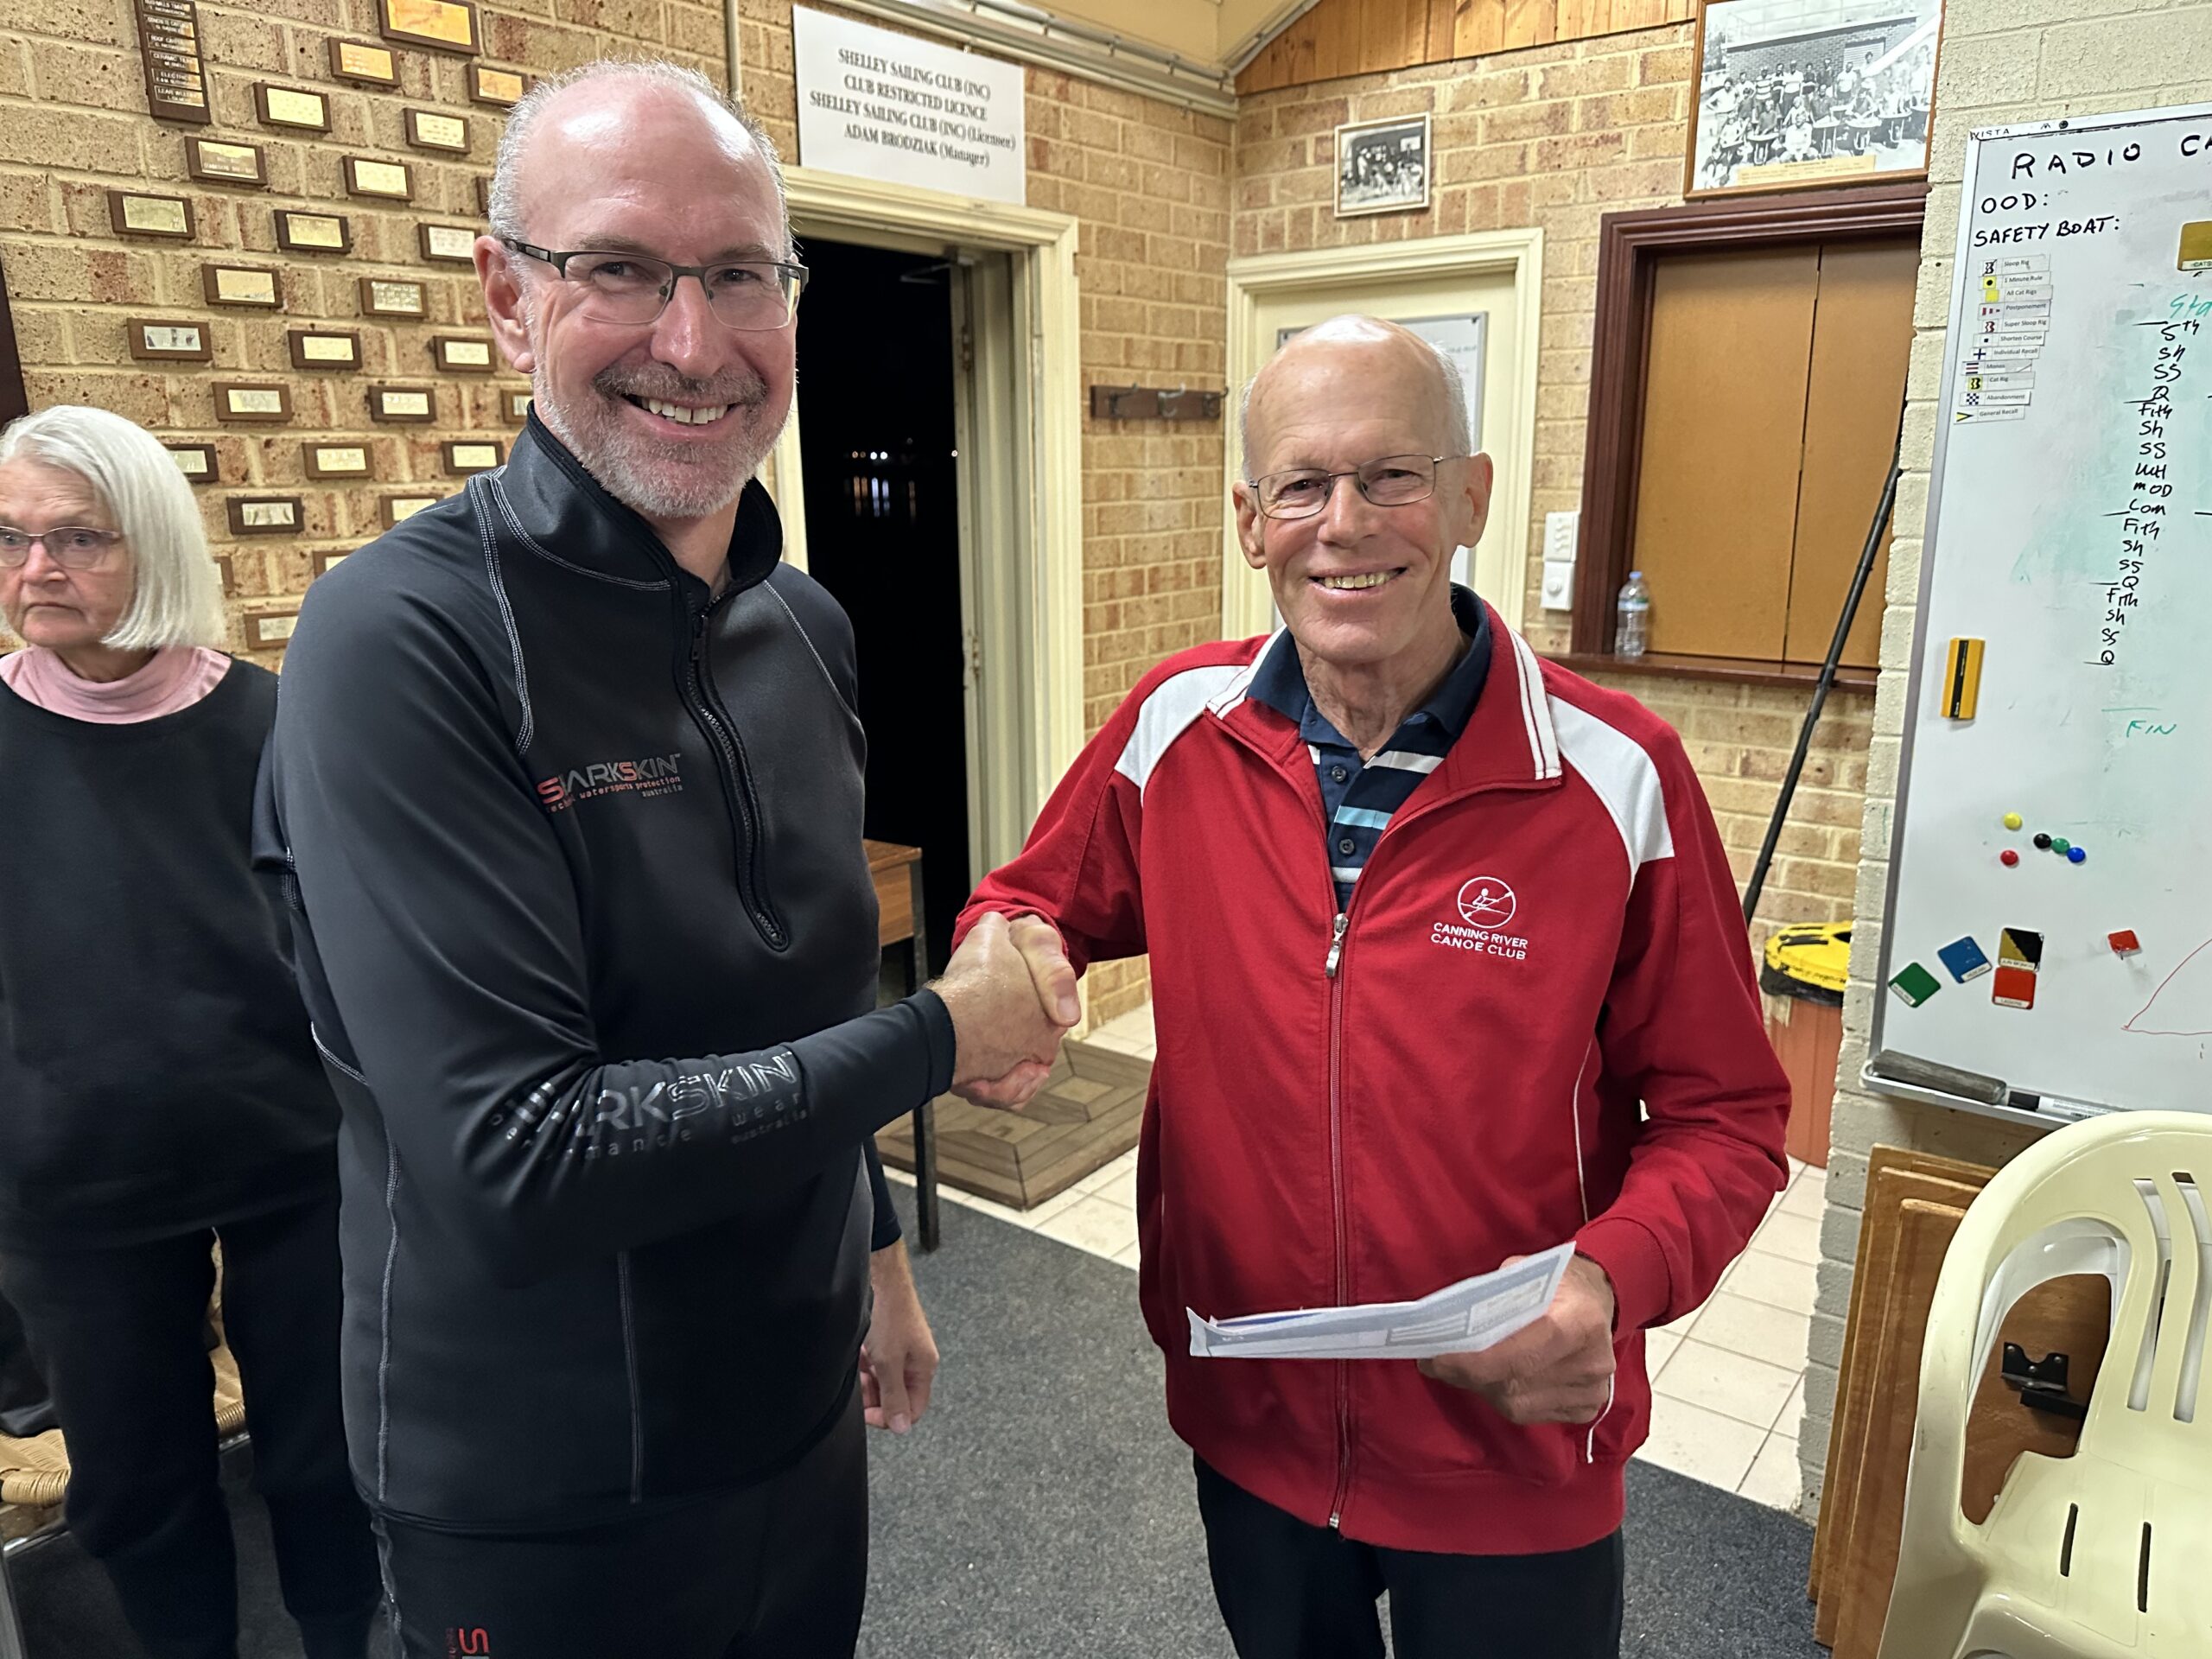 Tuesday 30th May 2023 : Tonight’s photo shows club Treasurer David Urquhart presenting John Reddel with a movie voucher prize.